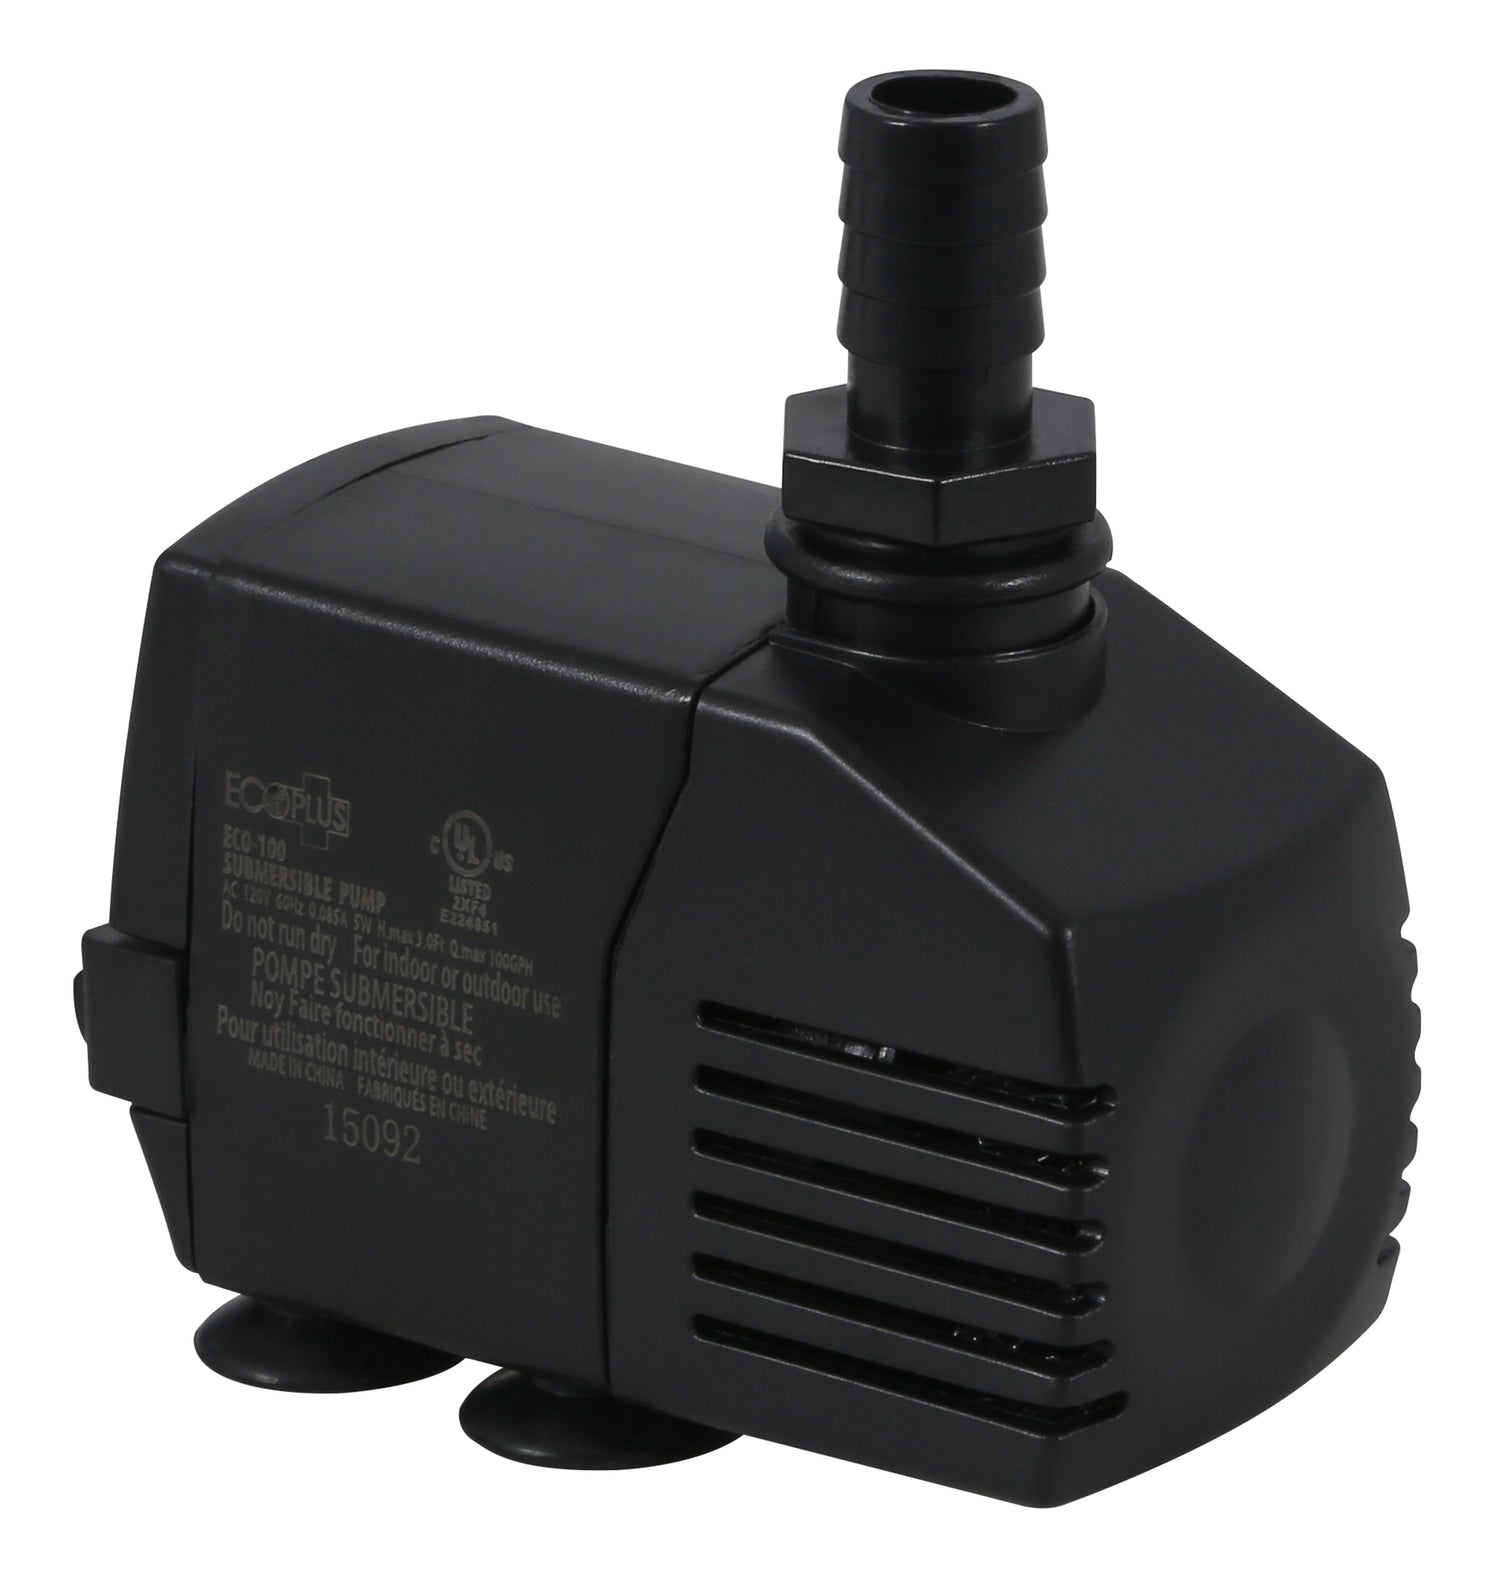 EcoPlus Fixed Flow Submersible or Inline Pumps (H)